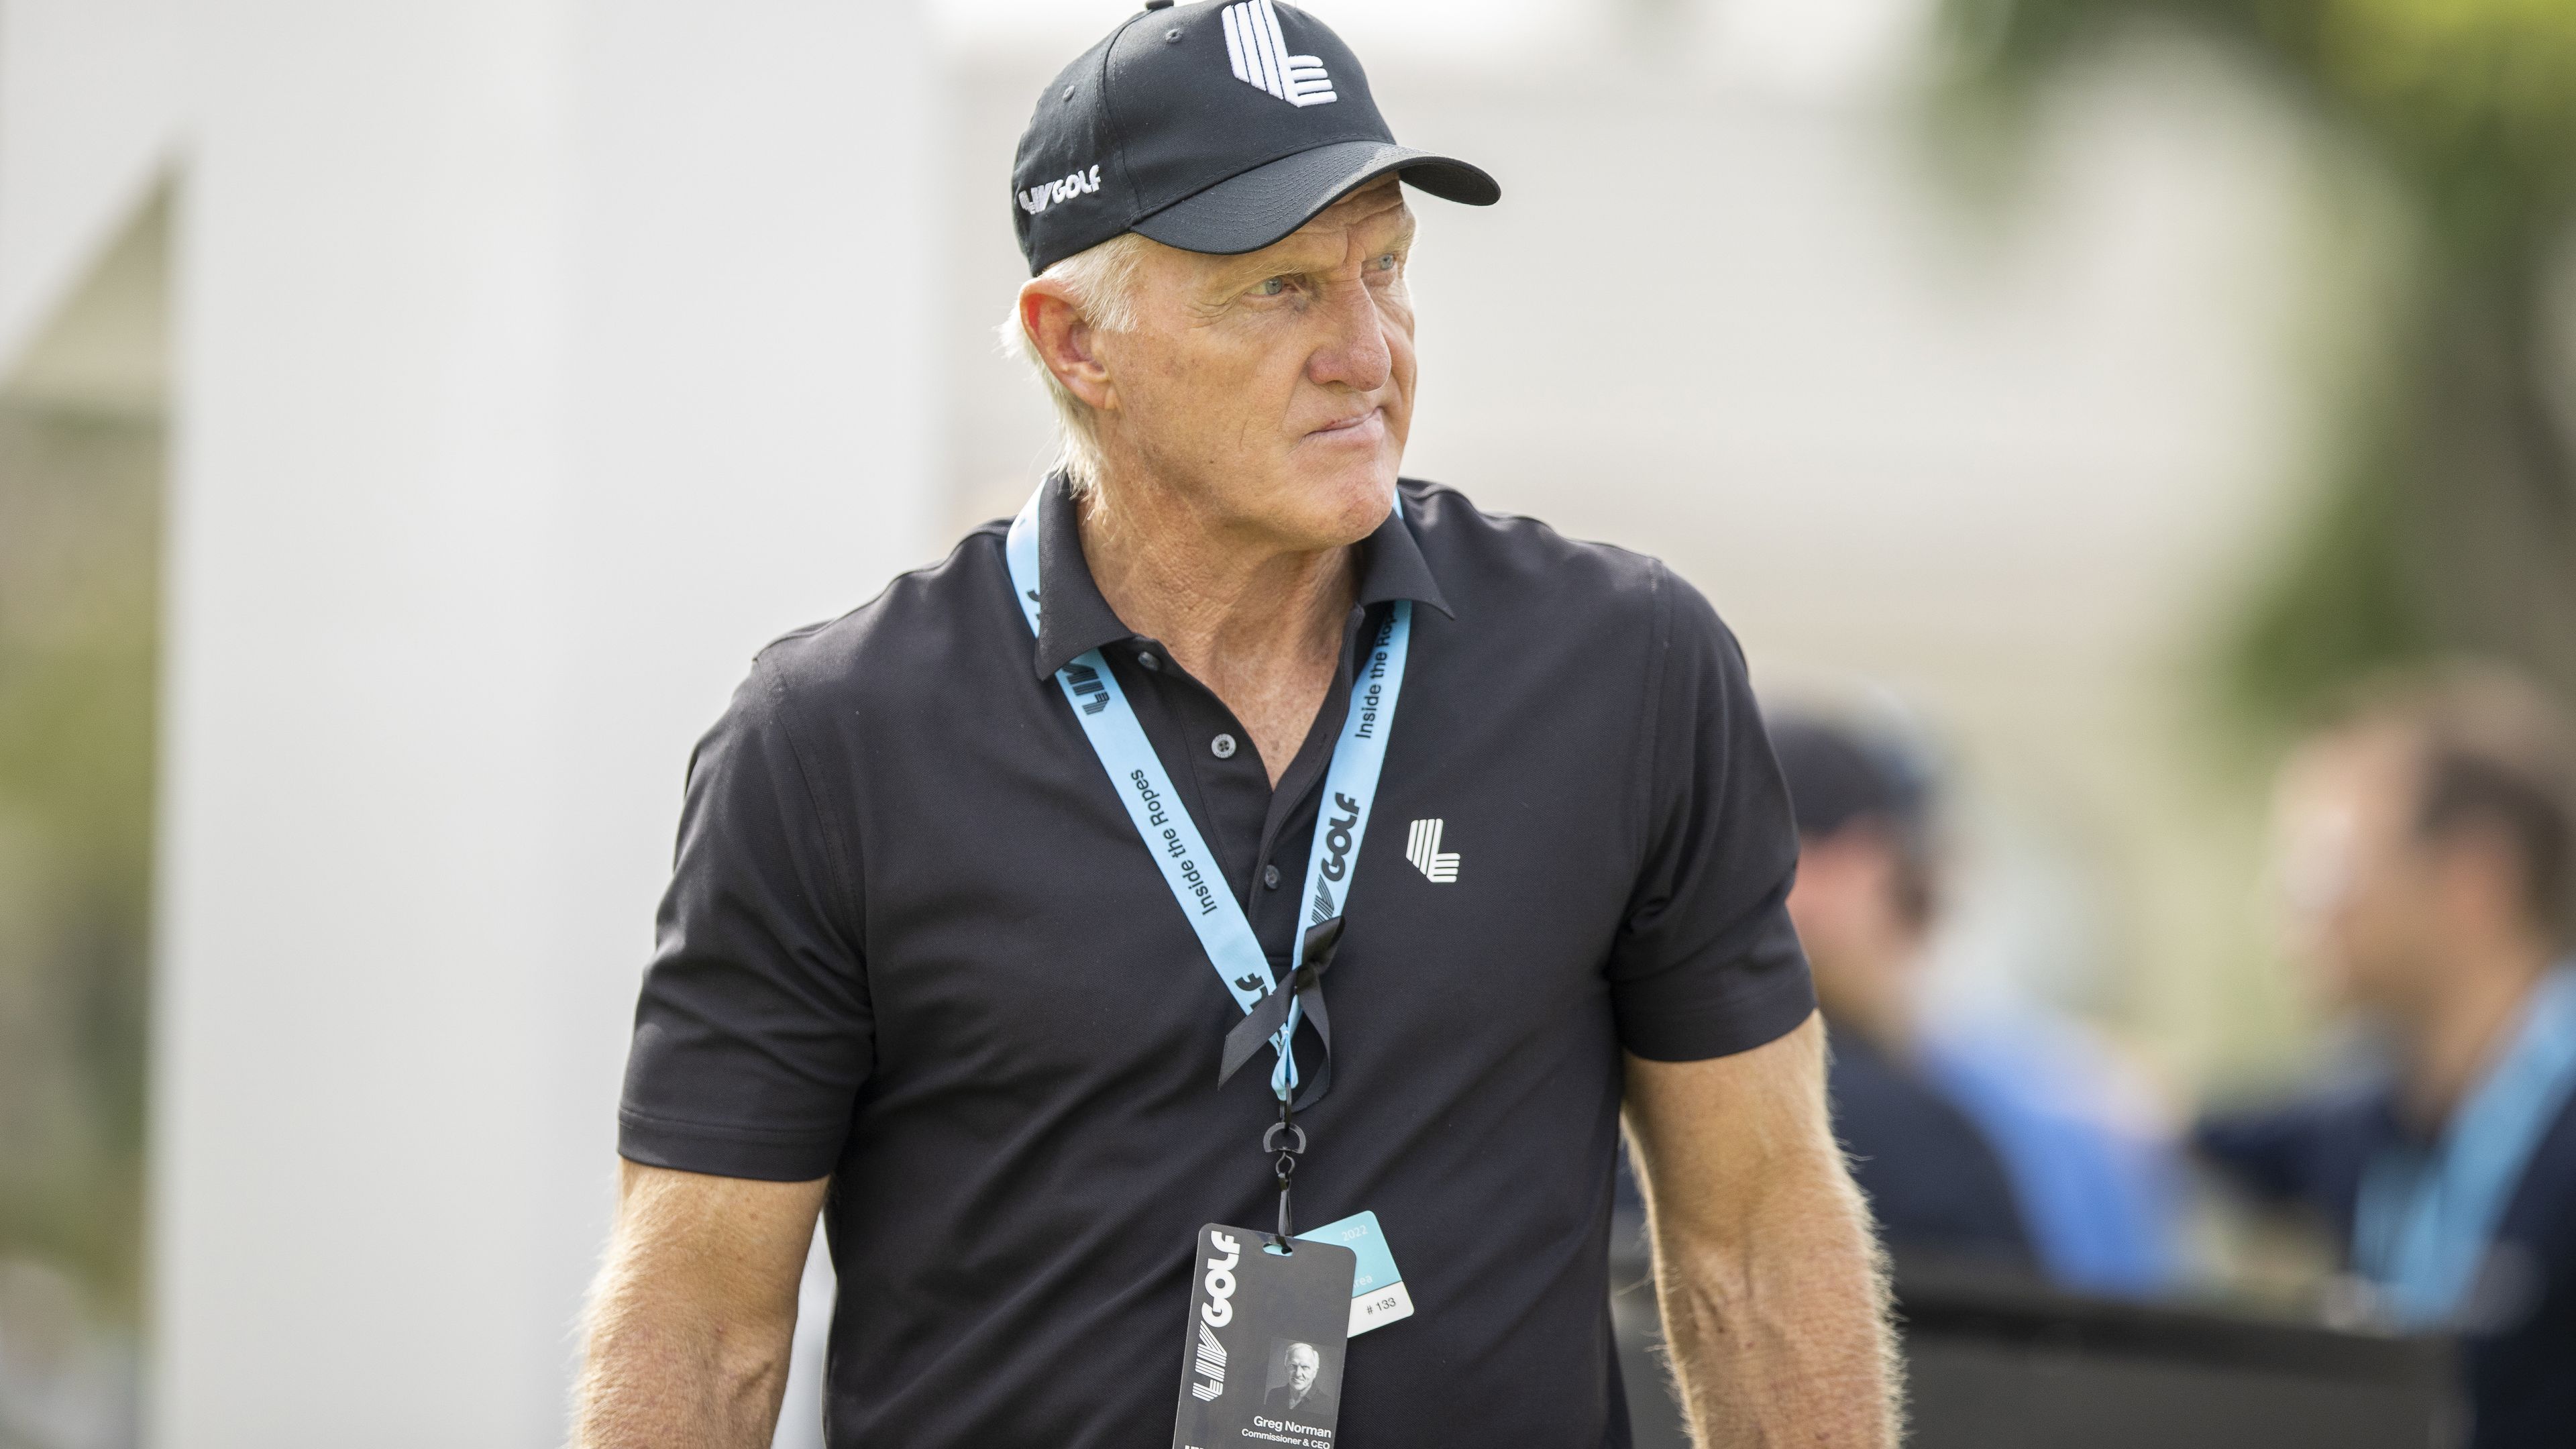 Greg Norman, CEO of LIV Golf, at the LIV Golf Invitational in Bangkok. (Photo by Peter Van der Klooster/Getty Images)